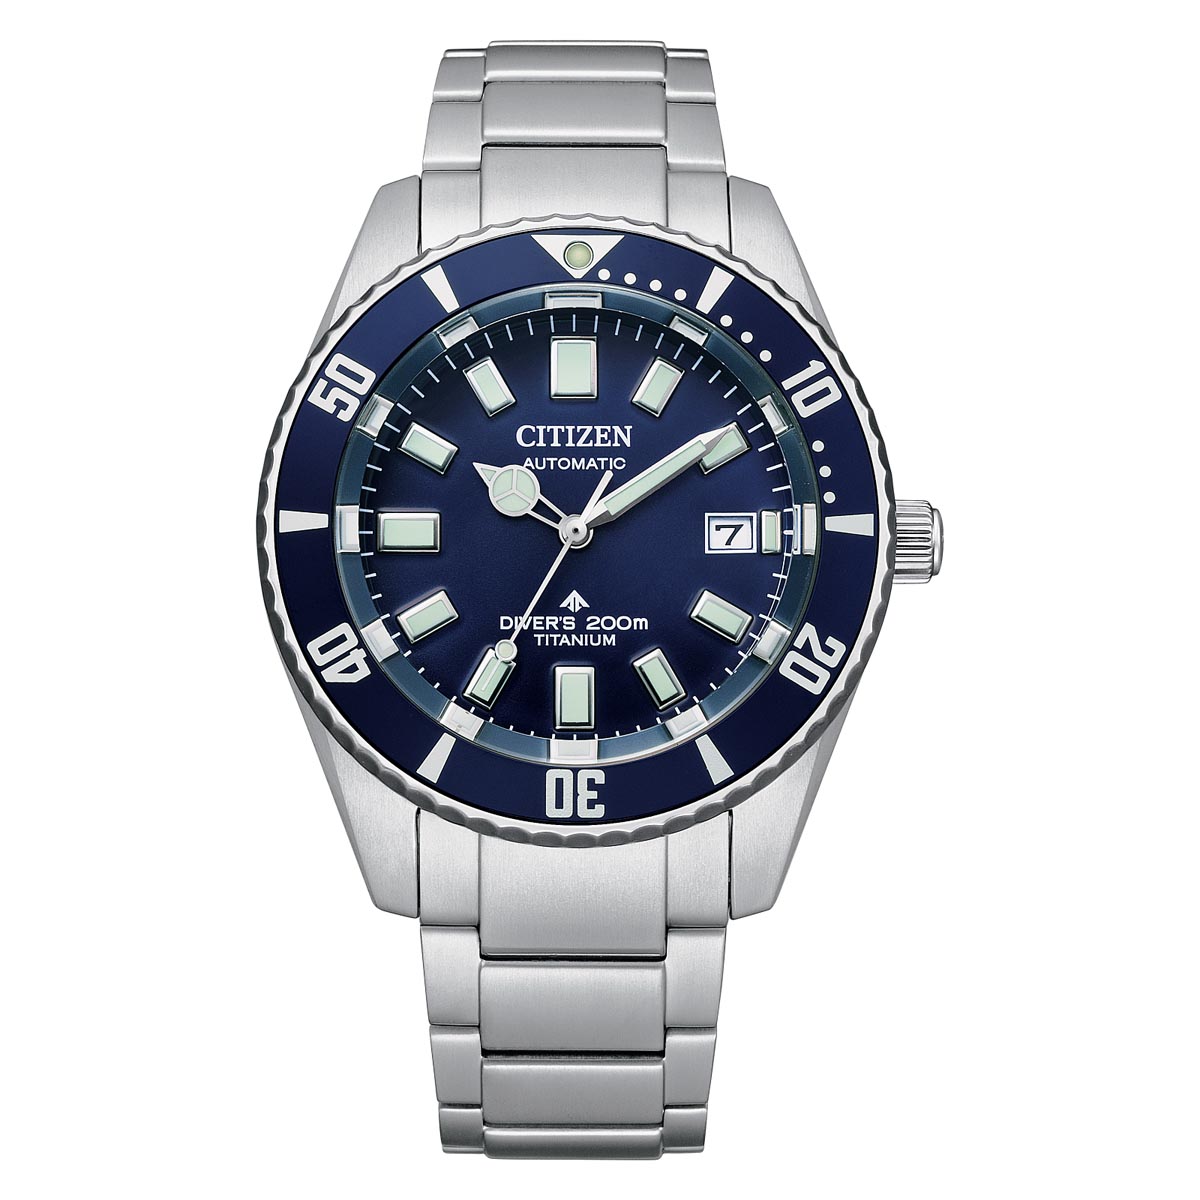 Citizen Promaster Fujitsubo Mens Watch with Blue Dial and Super Titanium™ Bracelet (automatic movement)